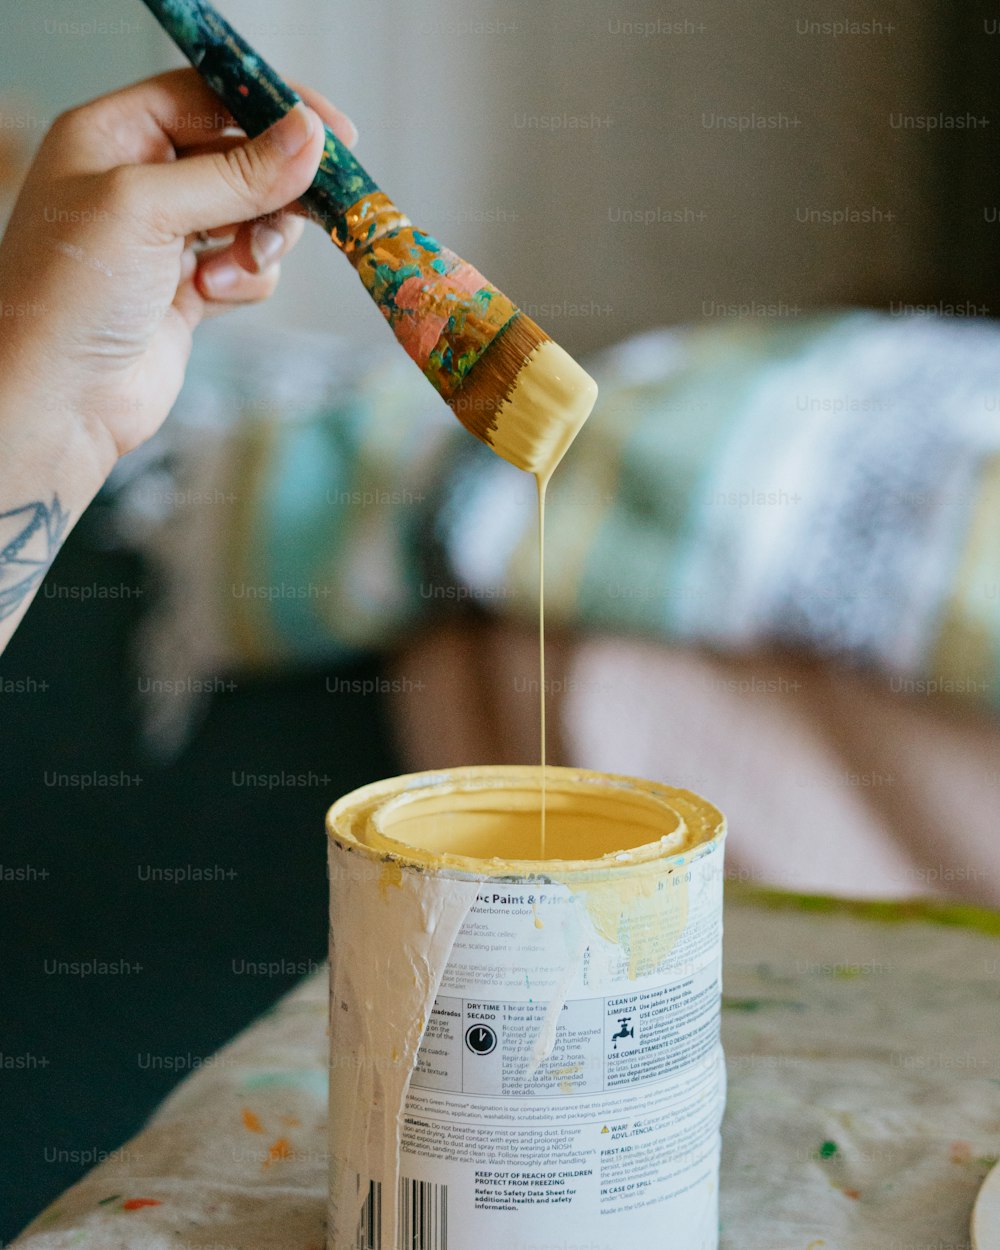 a person holding a paintbrush over a can of yellow paint